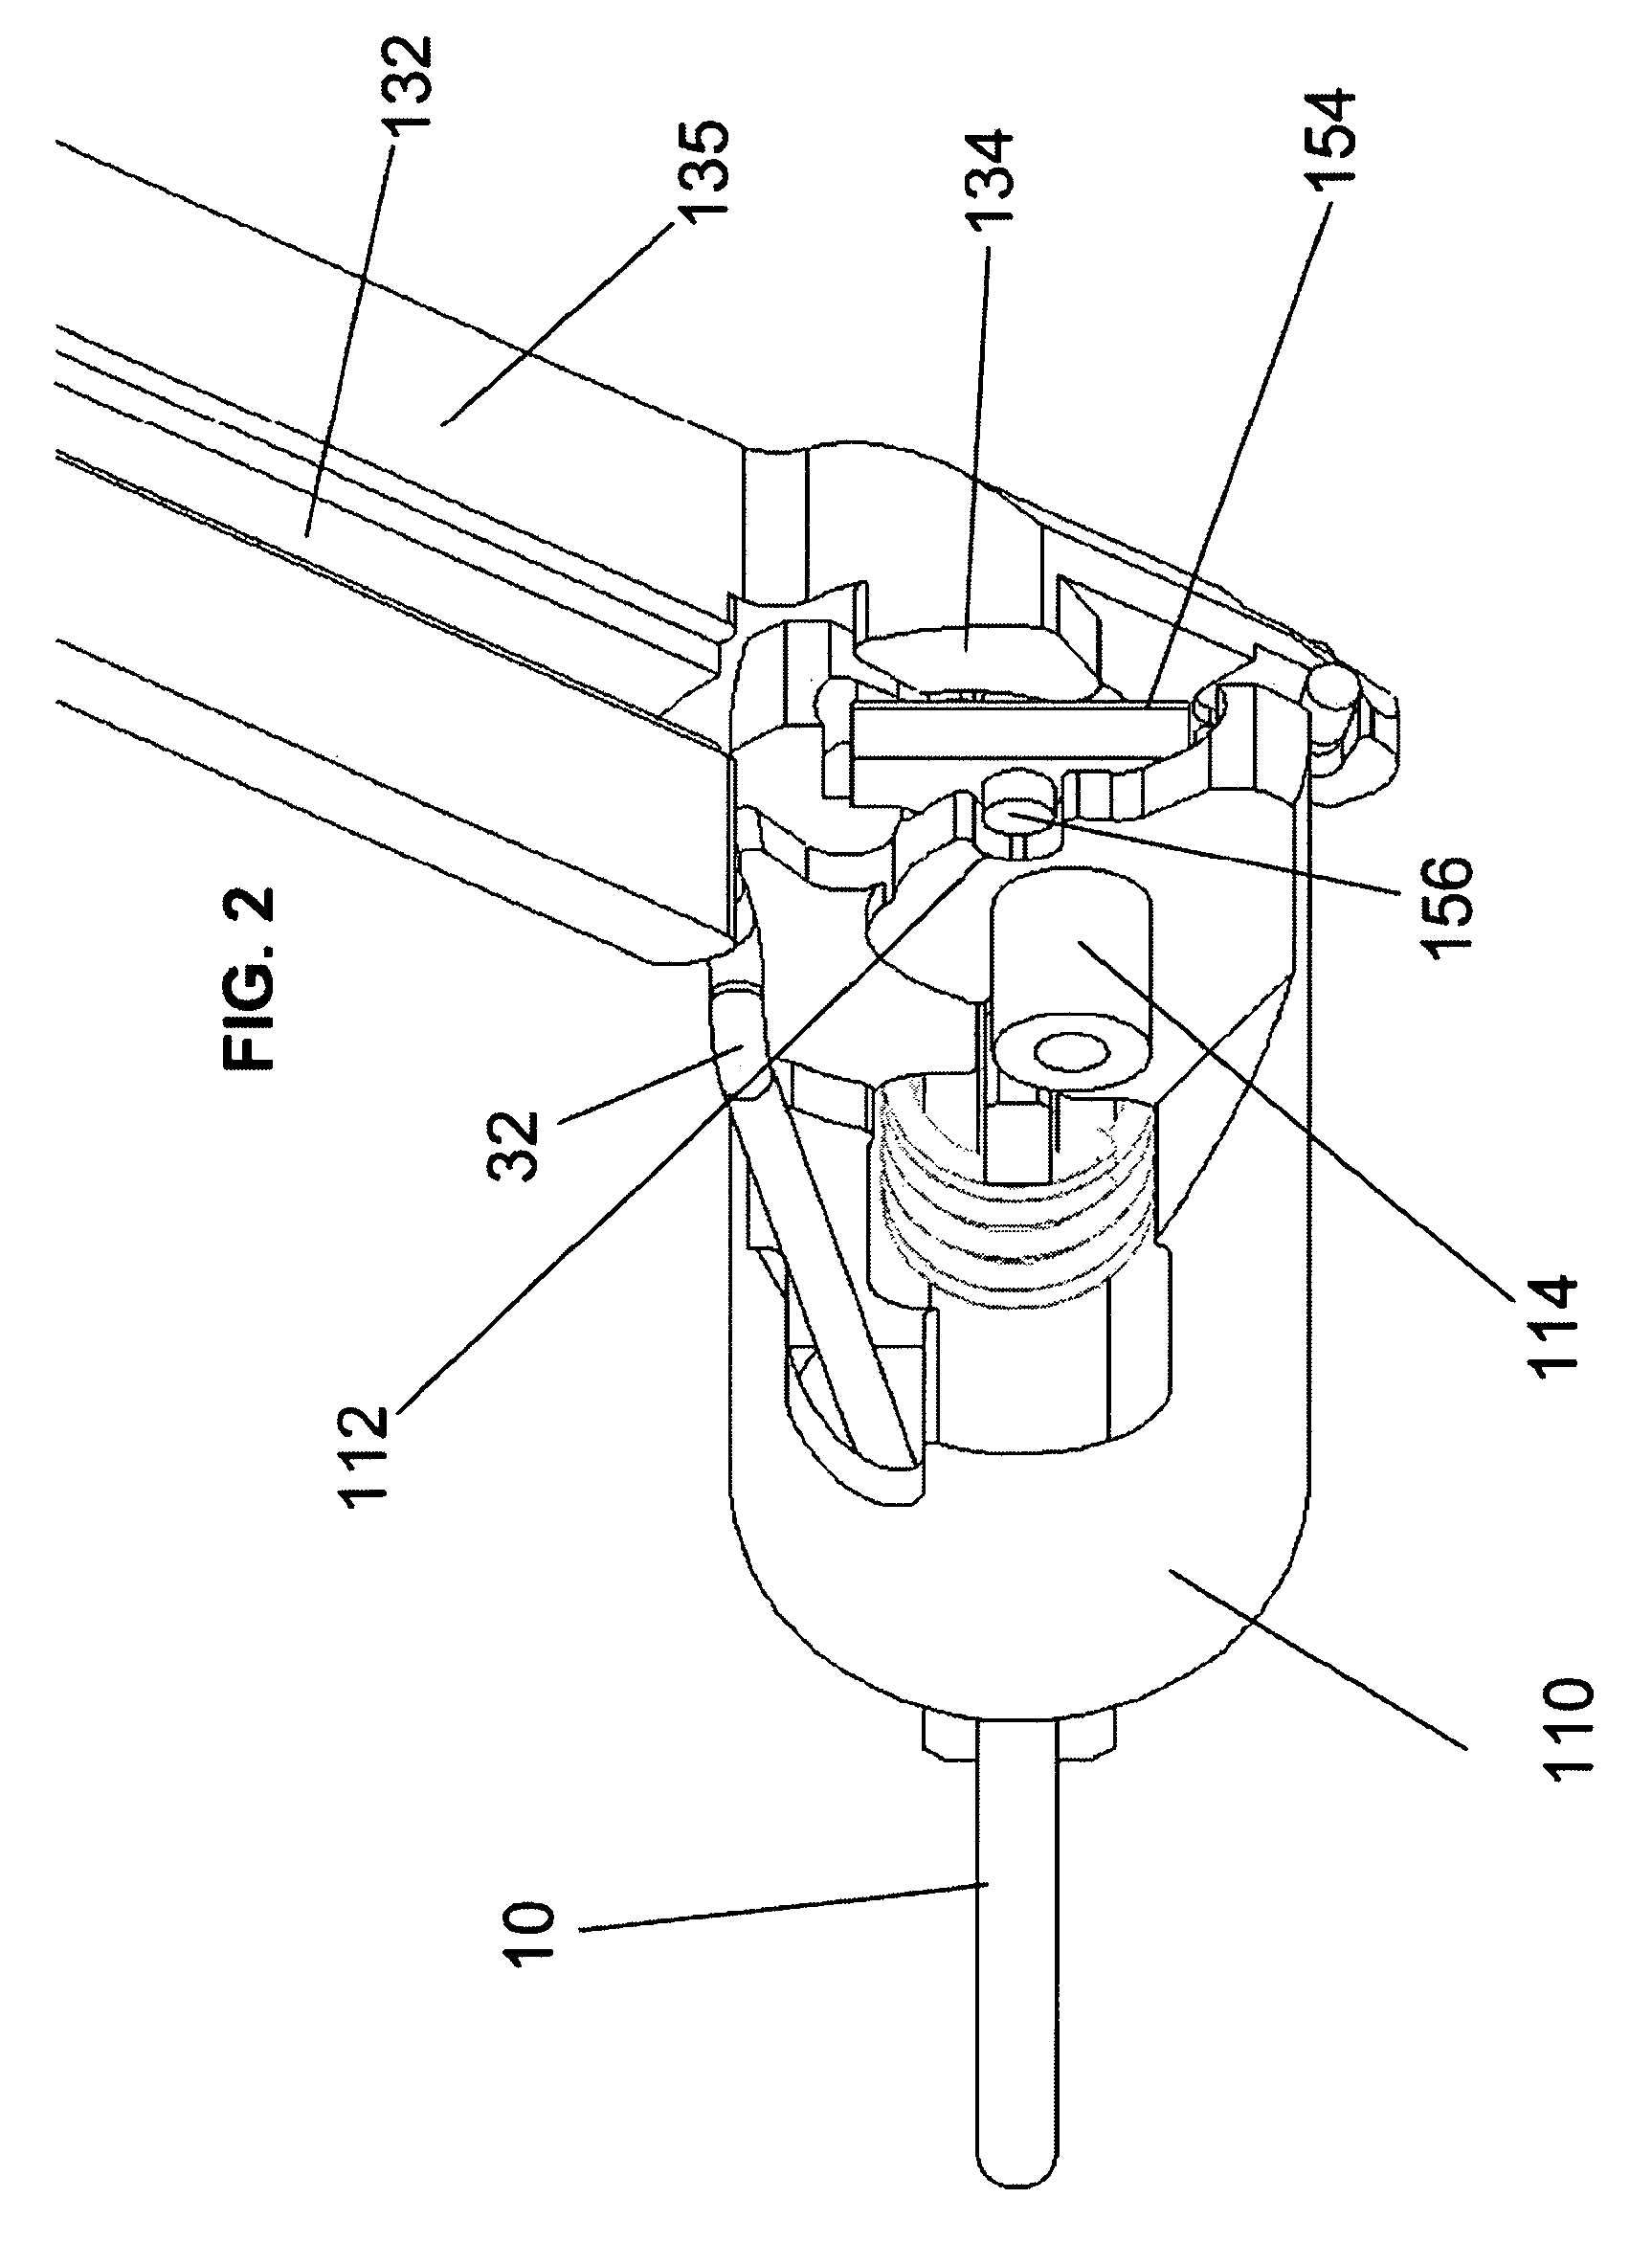 Cordless power-assisted medical cauterization and cutting device